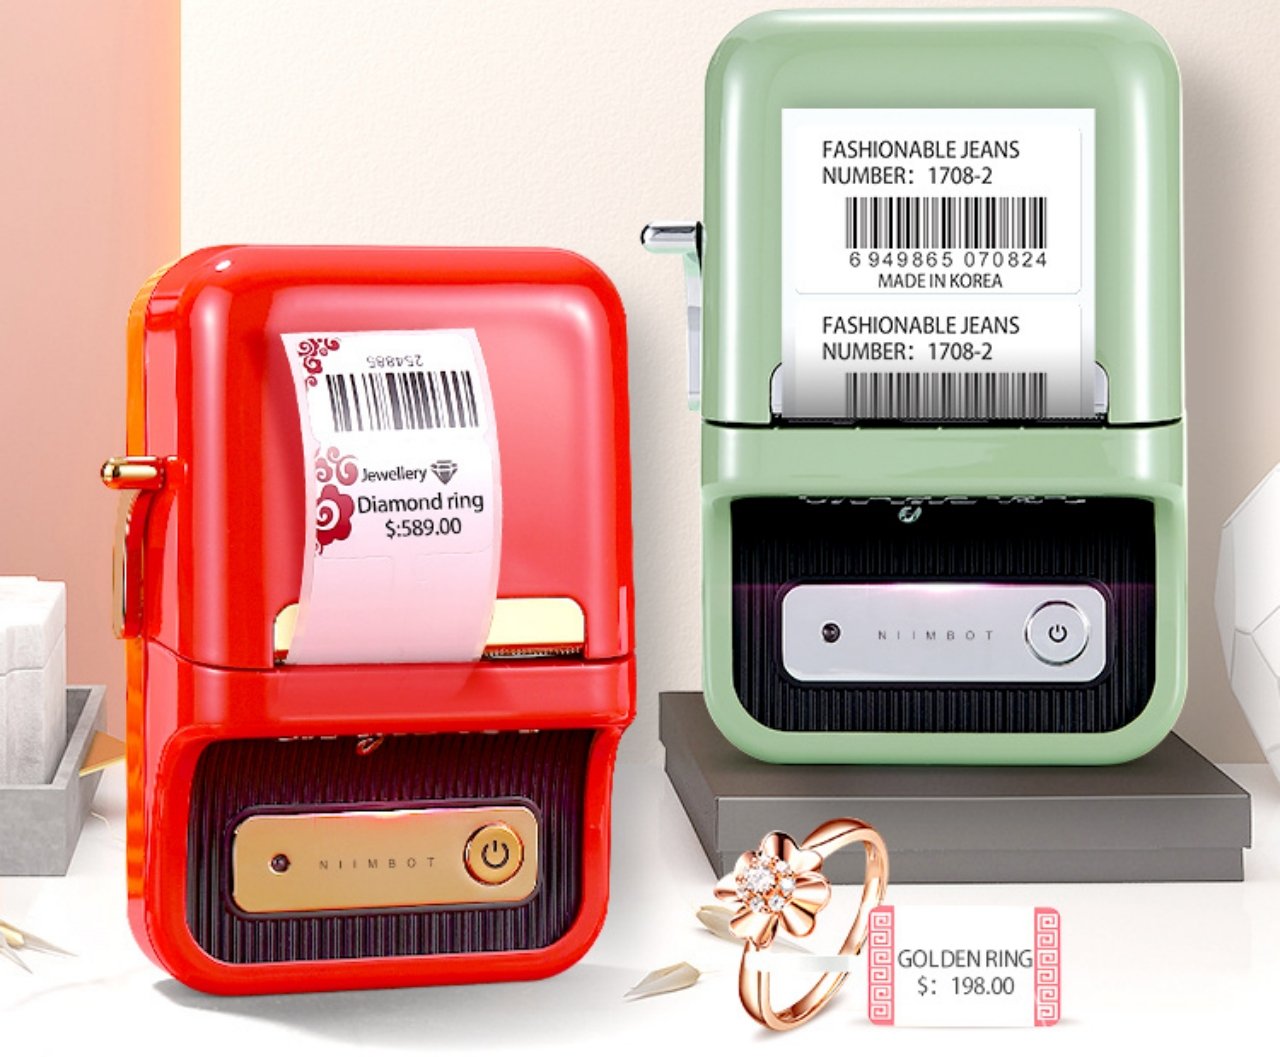 Niimbot B21 label printer gives off some classy vintage vibes